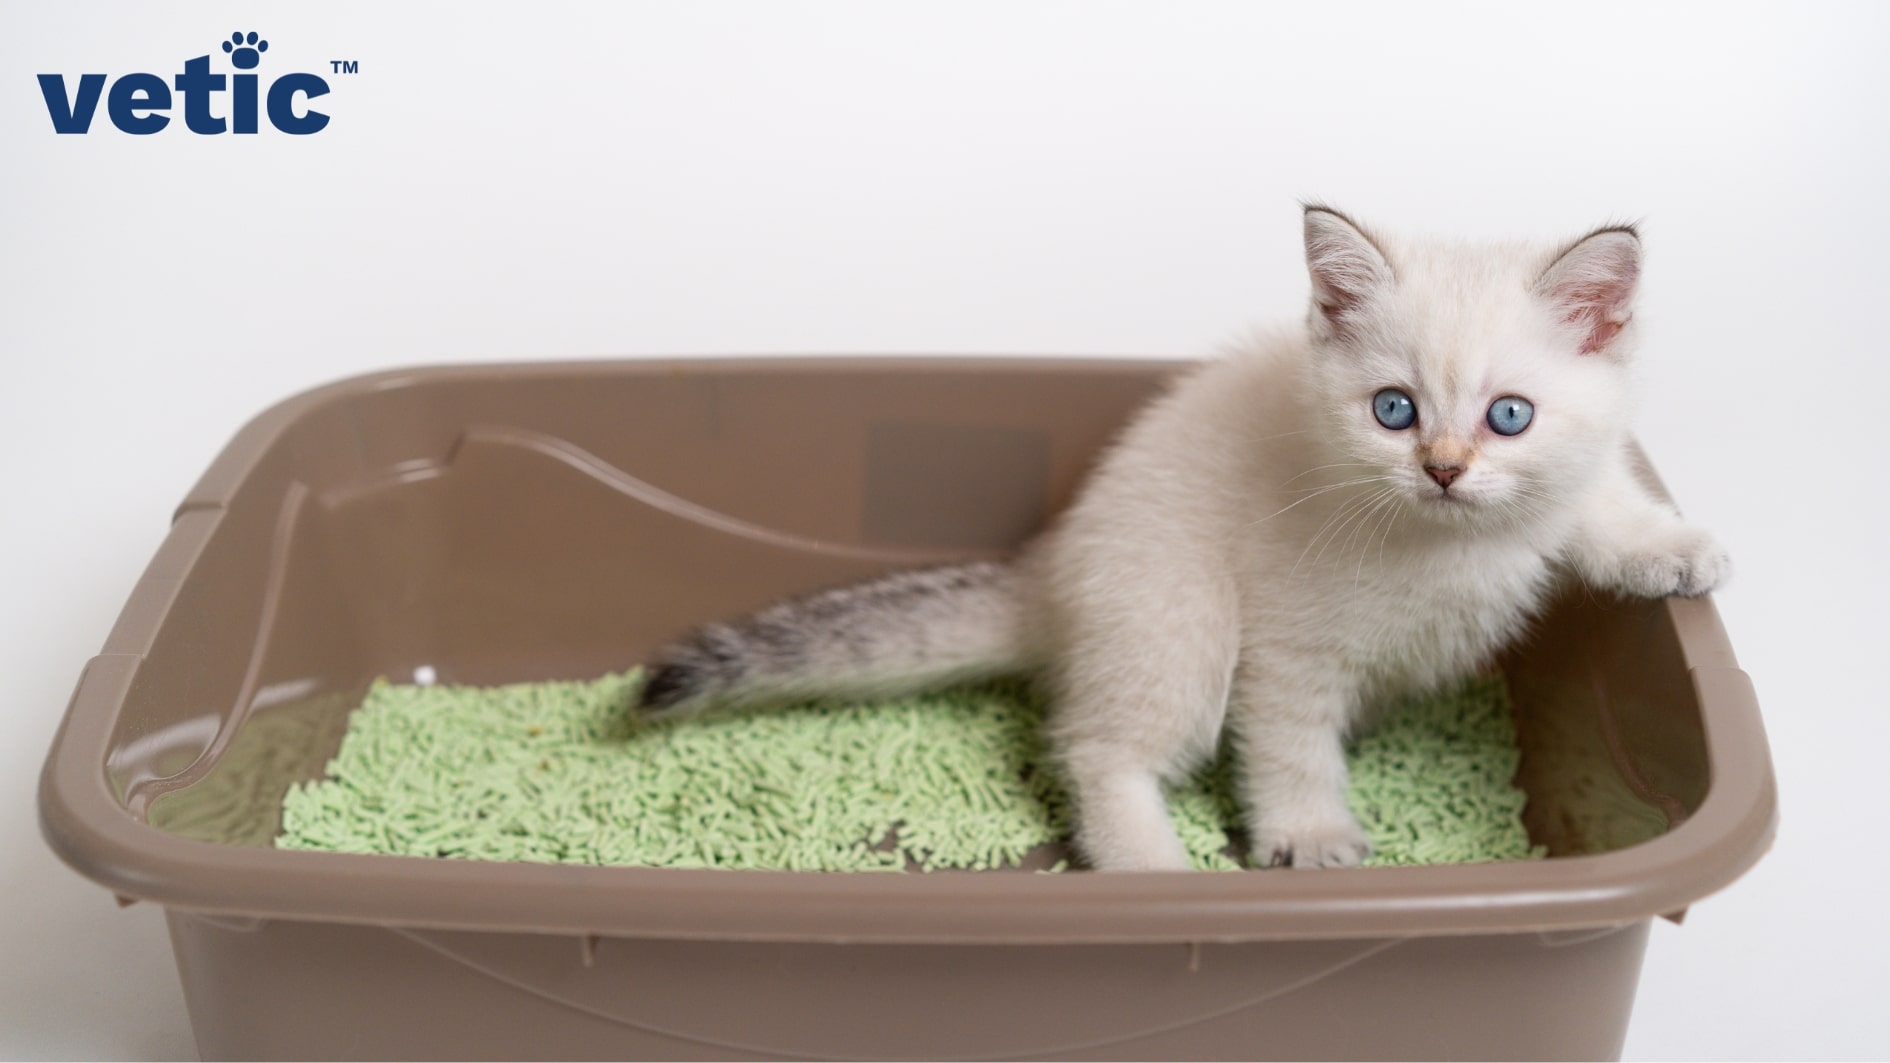 Small white kitten with sky blue eyes and a darker striped tail is sitting inside a comparatively larger, brown litter box with green litter of undiscernible material. New cat owners must choose a litter that is non-toxic for their kitty